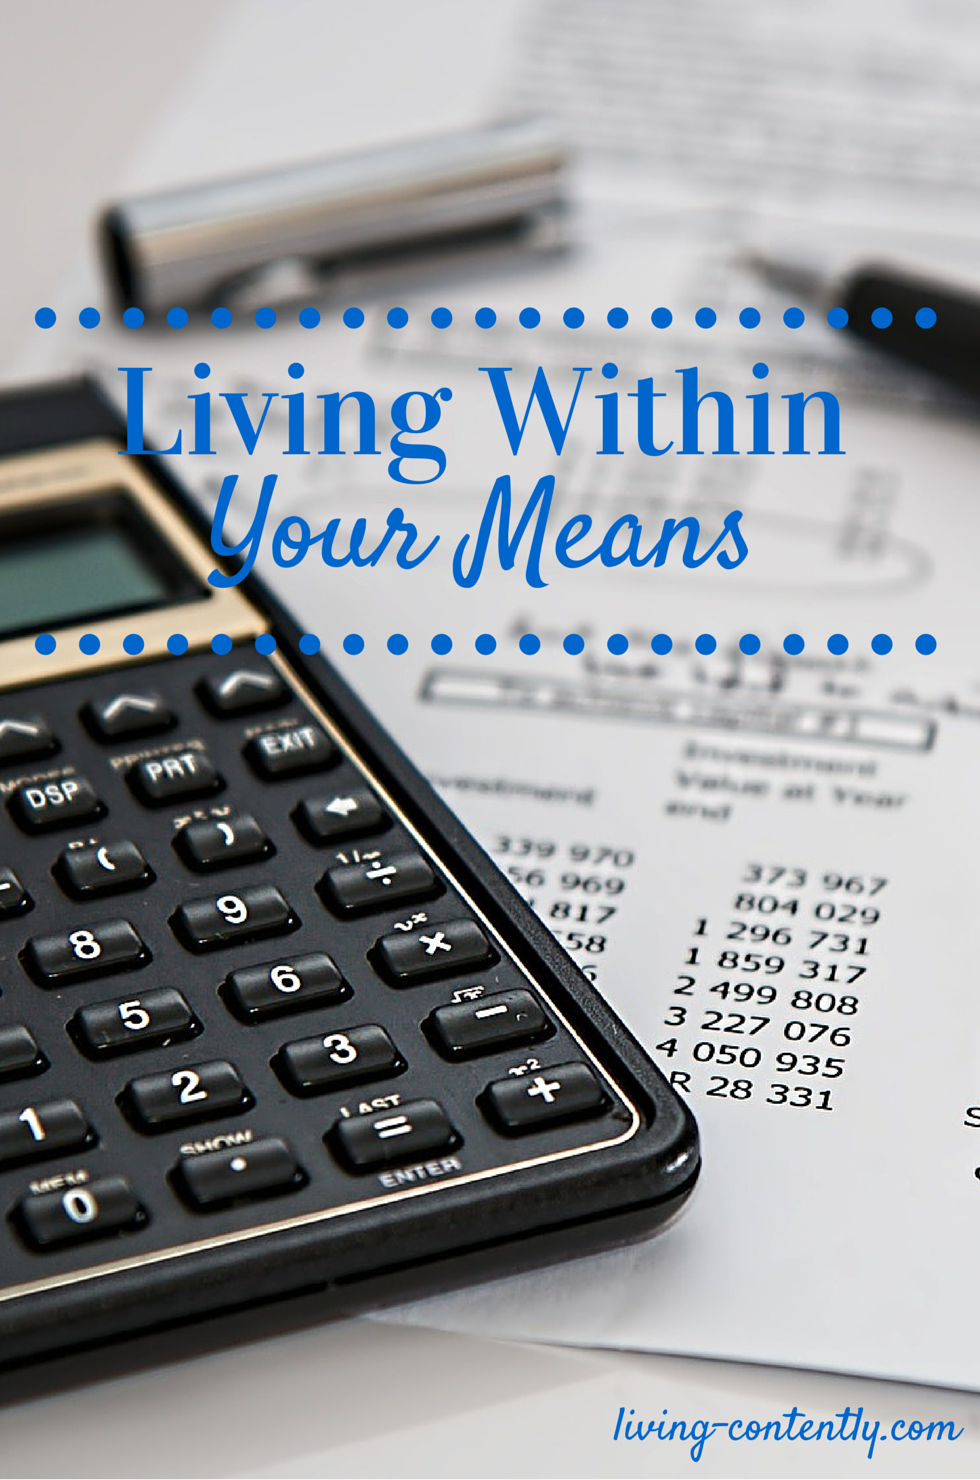 Living Within Your Means at Living-Contently.com